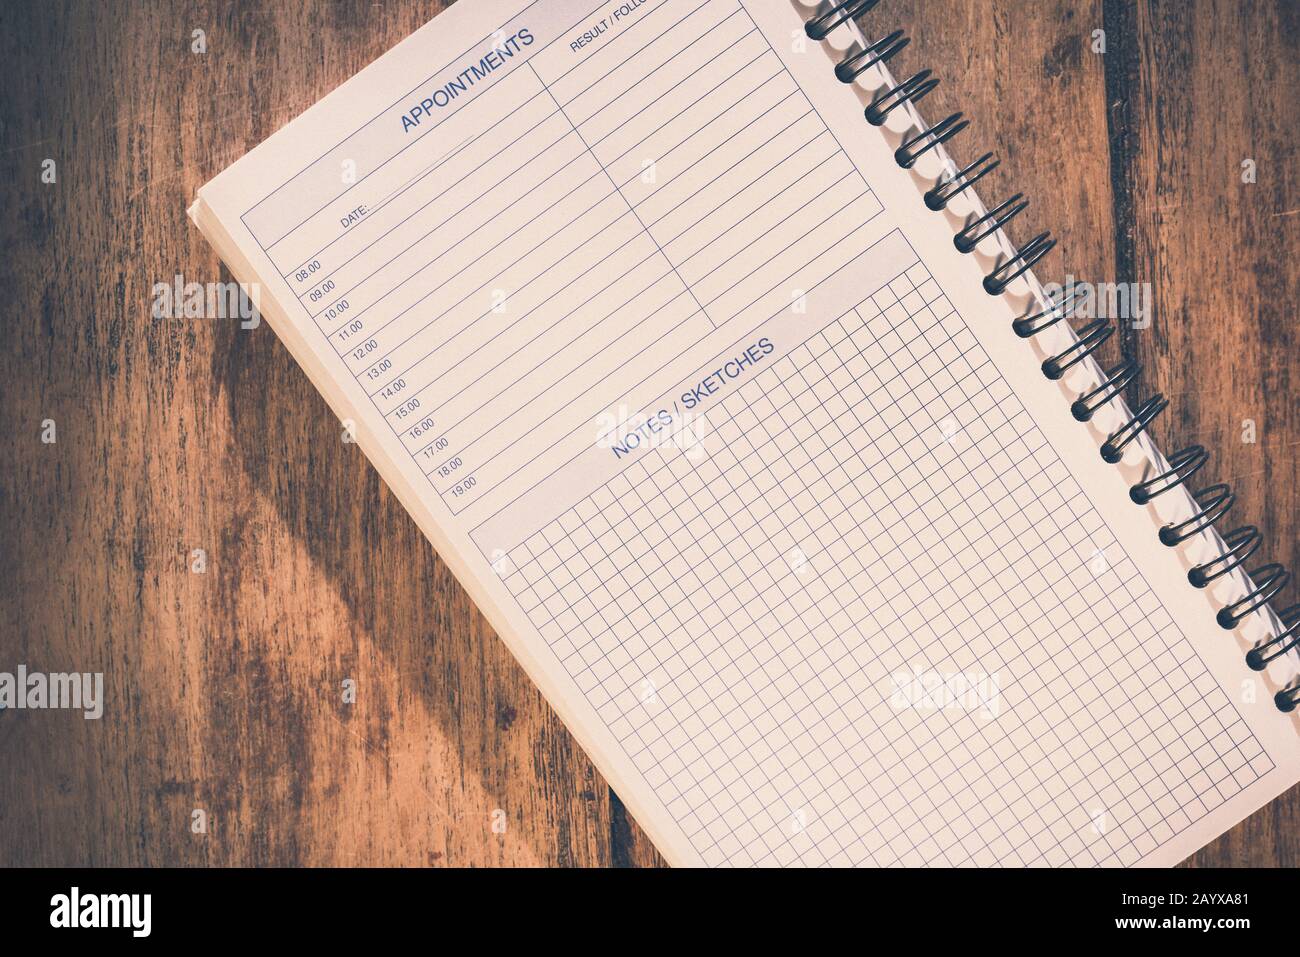 Office table concept. Blank notebook with appointments list and notes/sketches section. Retro look. Stock Photo